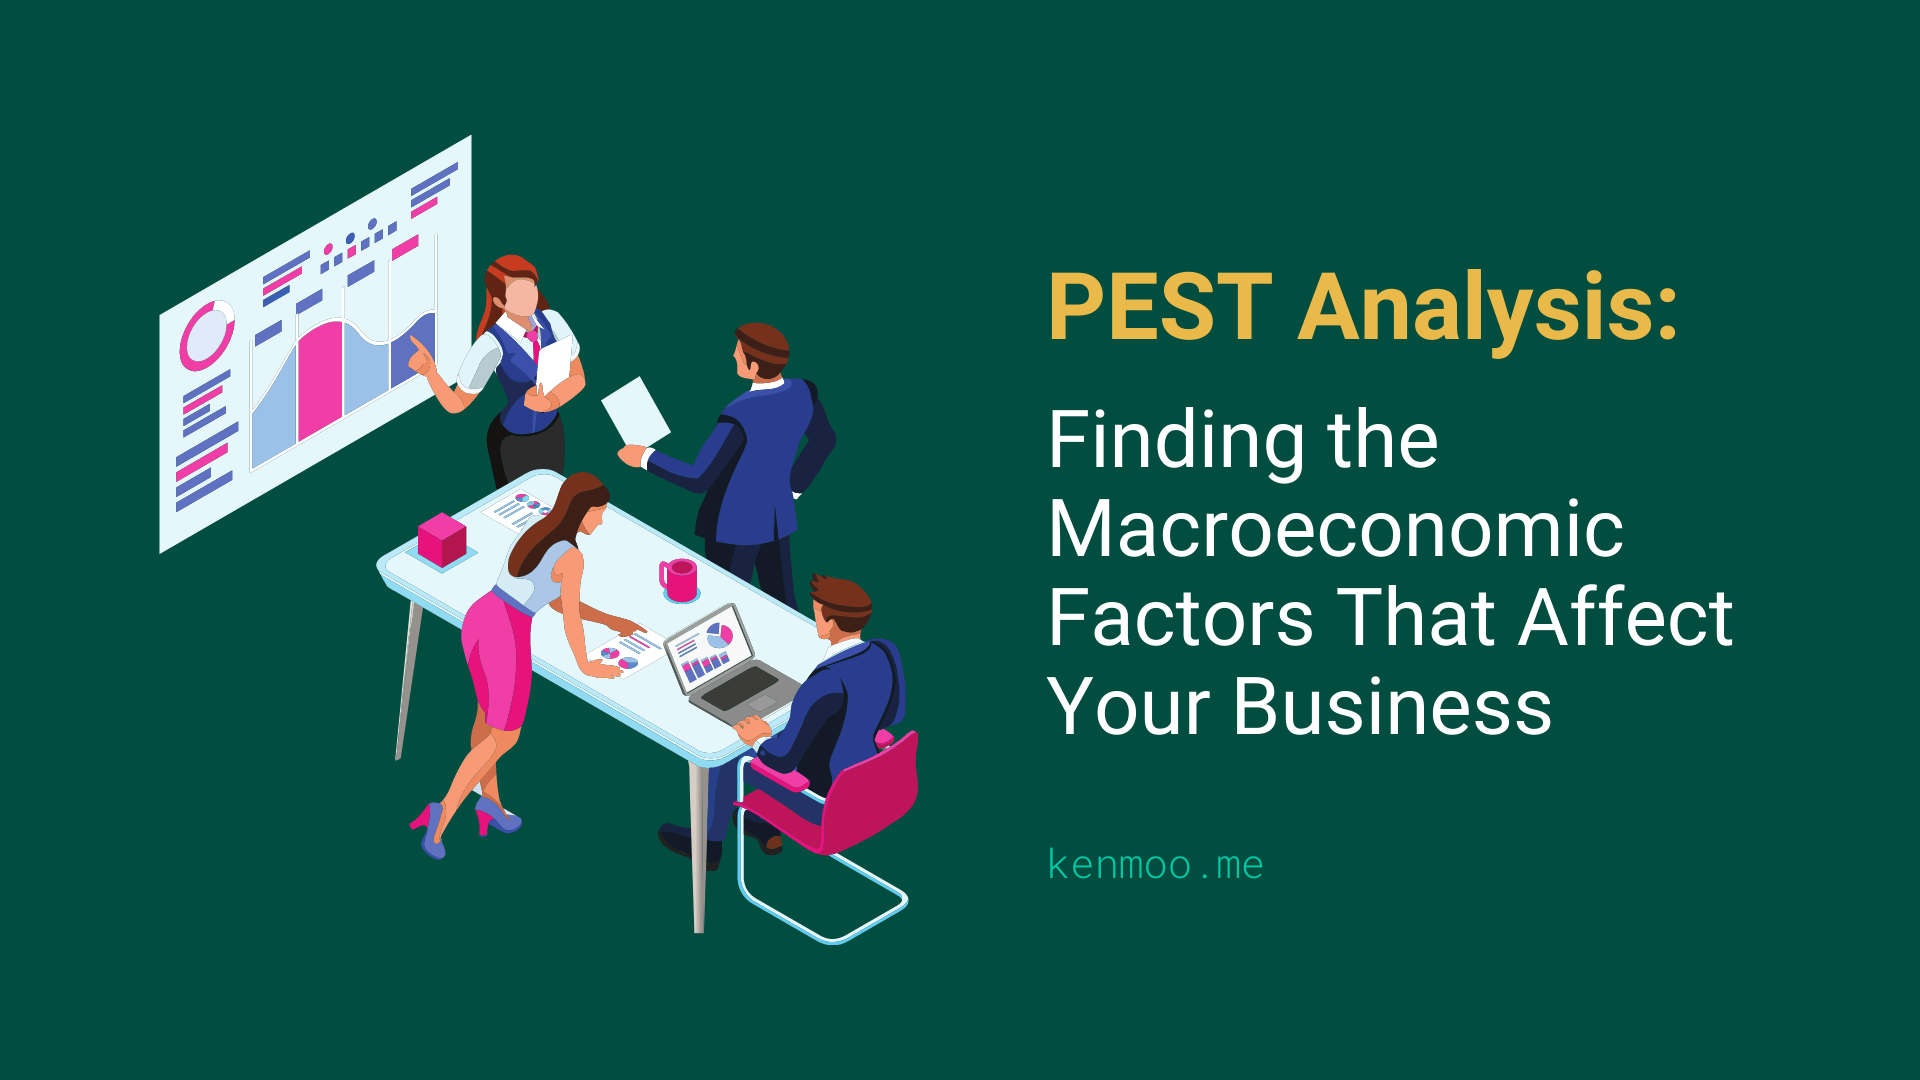 PEST Analysis: Finding the Macroeconomic Factors That Affect Your Business